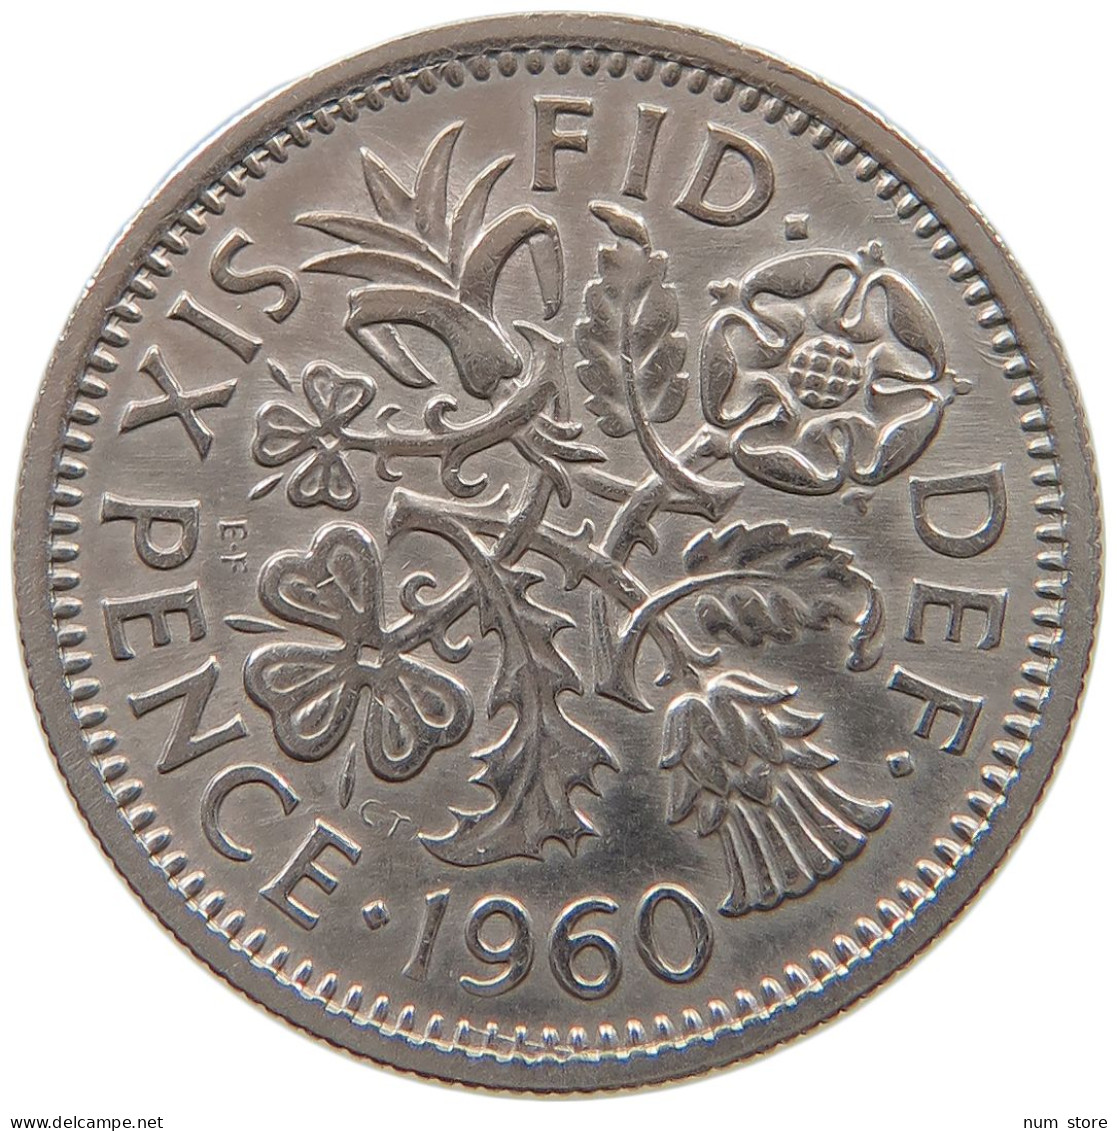 GREAT BRITAIN SIXPENCE 1960 #a046 0693 - H. 6 Pence